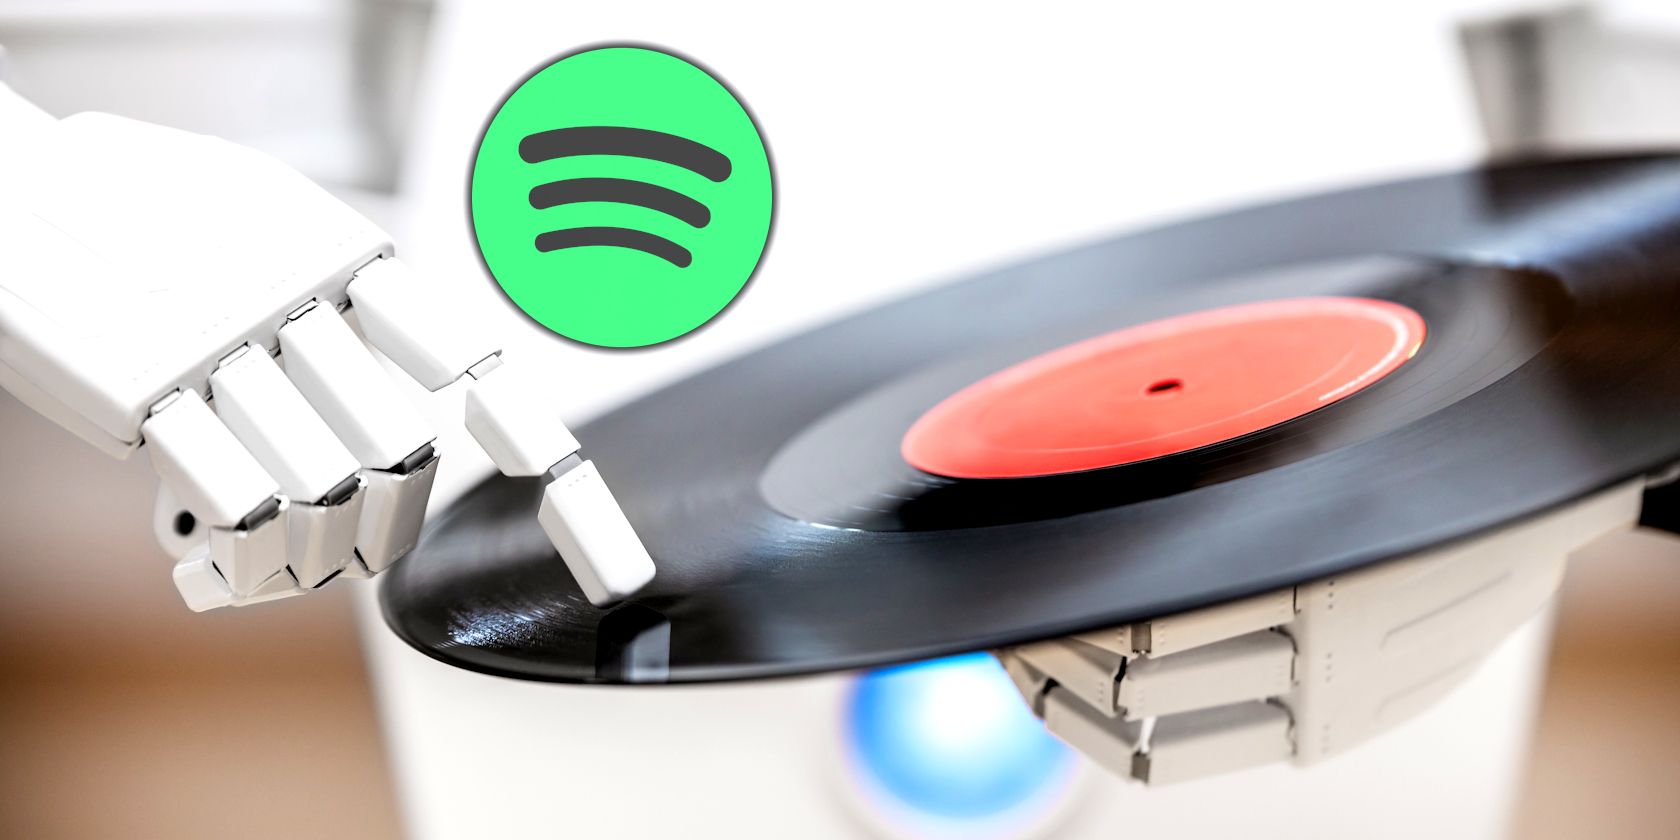 artificial intelligence robot using vinyl to play music